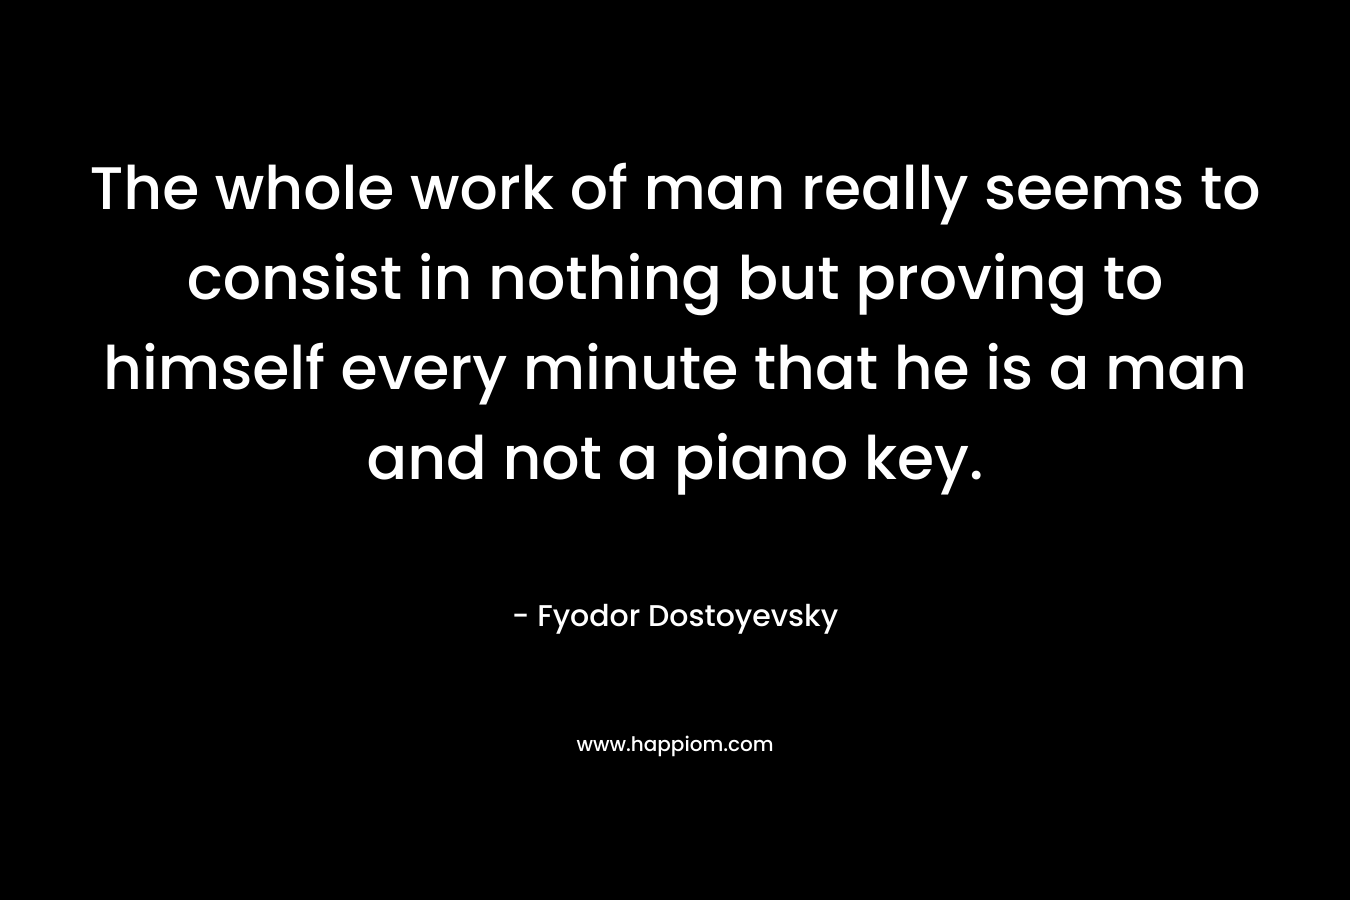 The whole work of man really seems to consist in nothing but proving to himself every minute that he is a man and not a piano key. – Fyodor Dostoyevsky